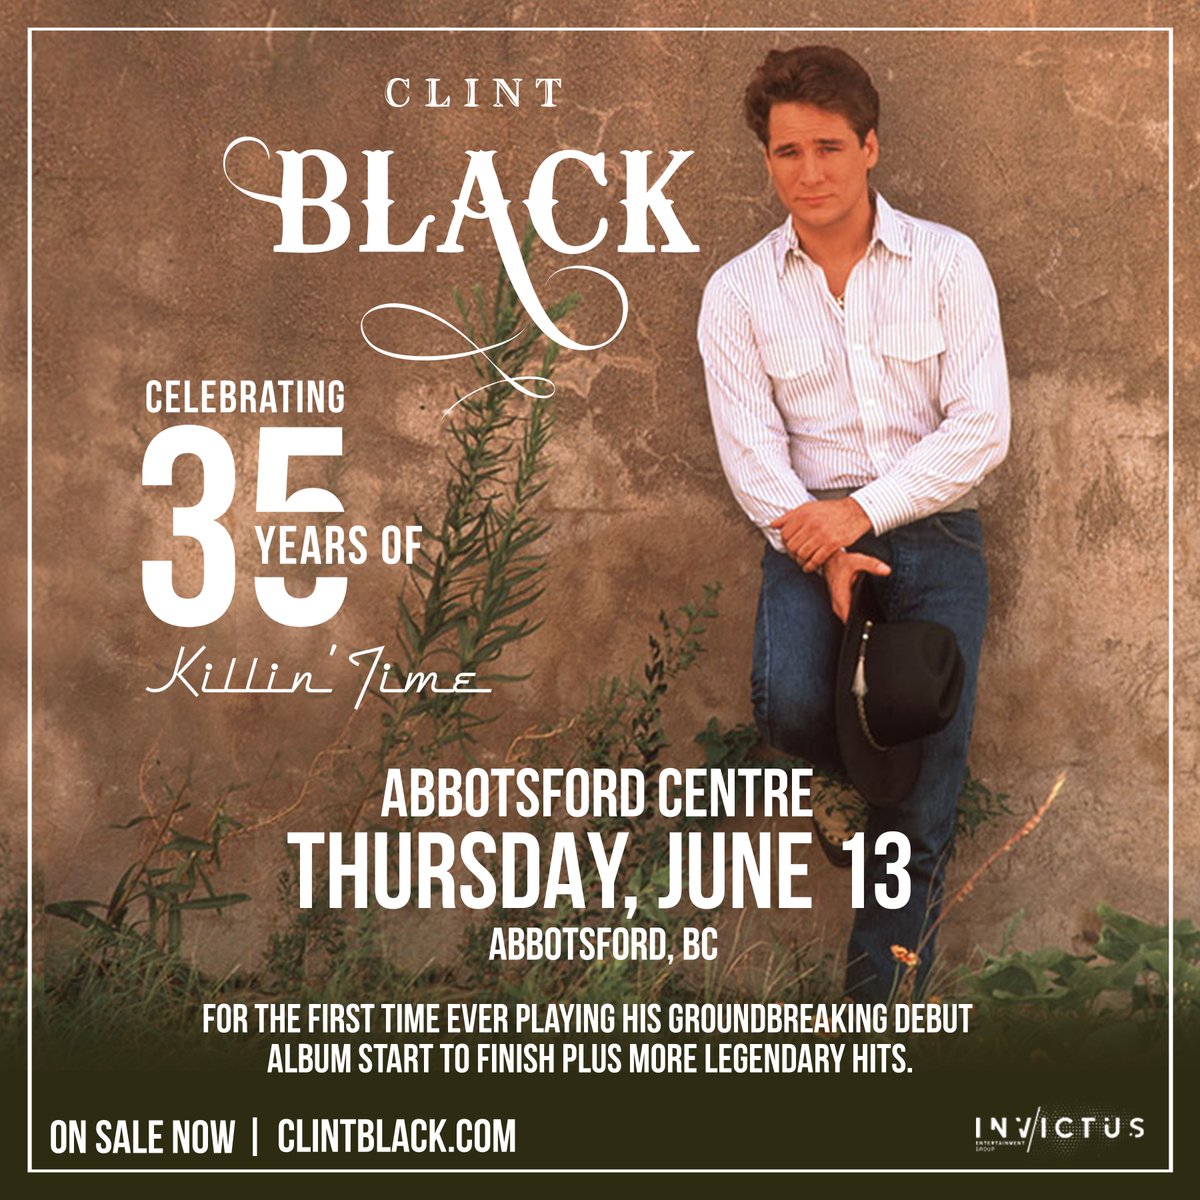 TICKETS ARE ON SALE NOW for Clint Black at @AbbyCentre on June 13th! Get your tickets here: tinyurl.com/33pjwtsv